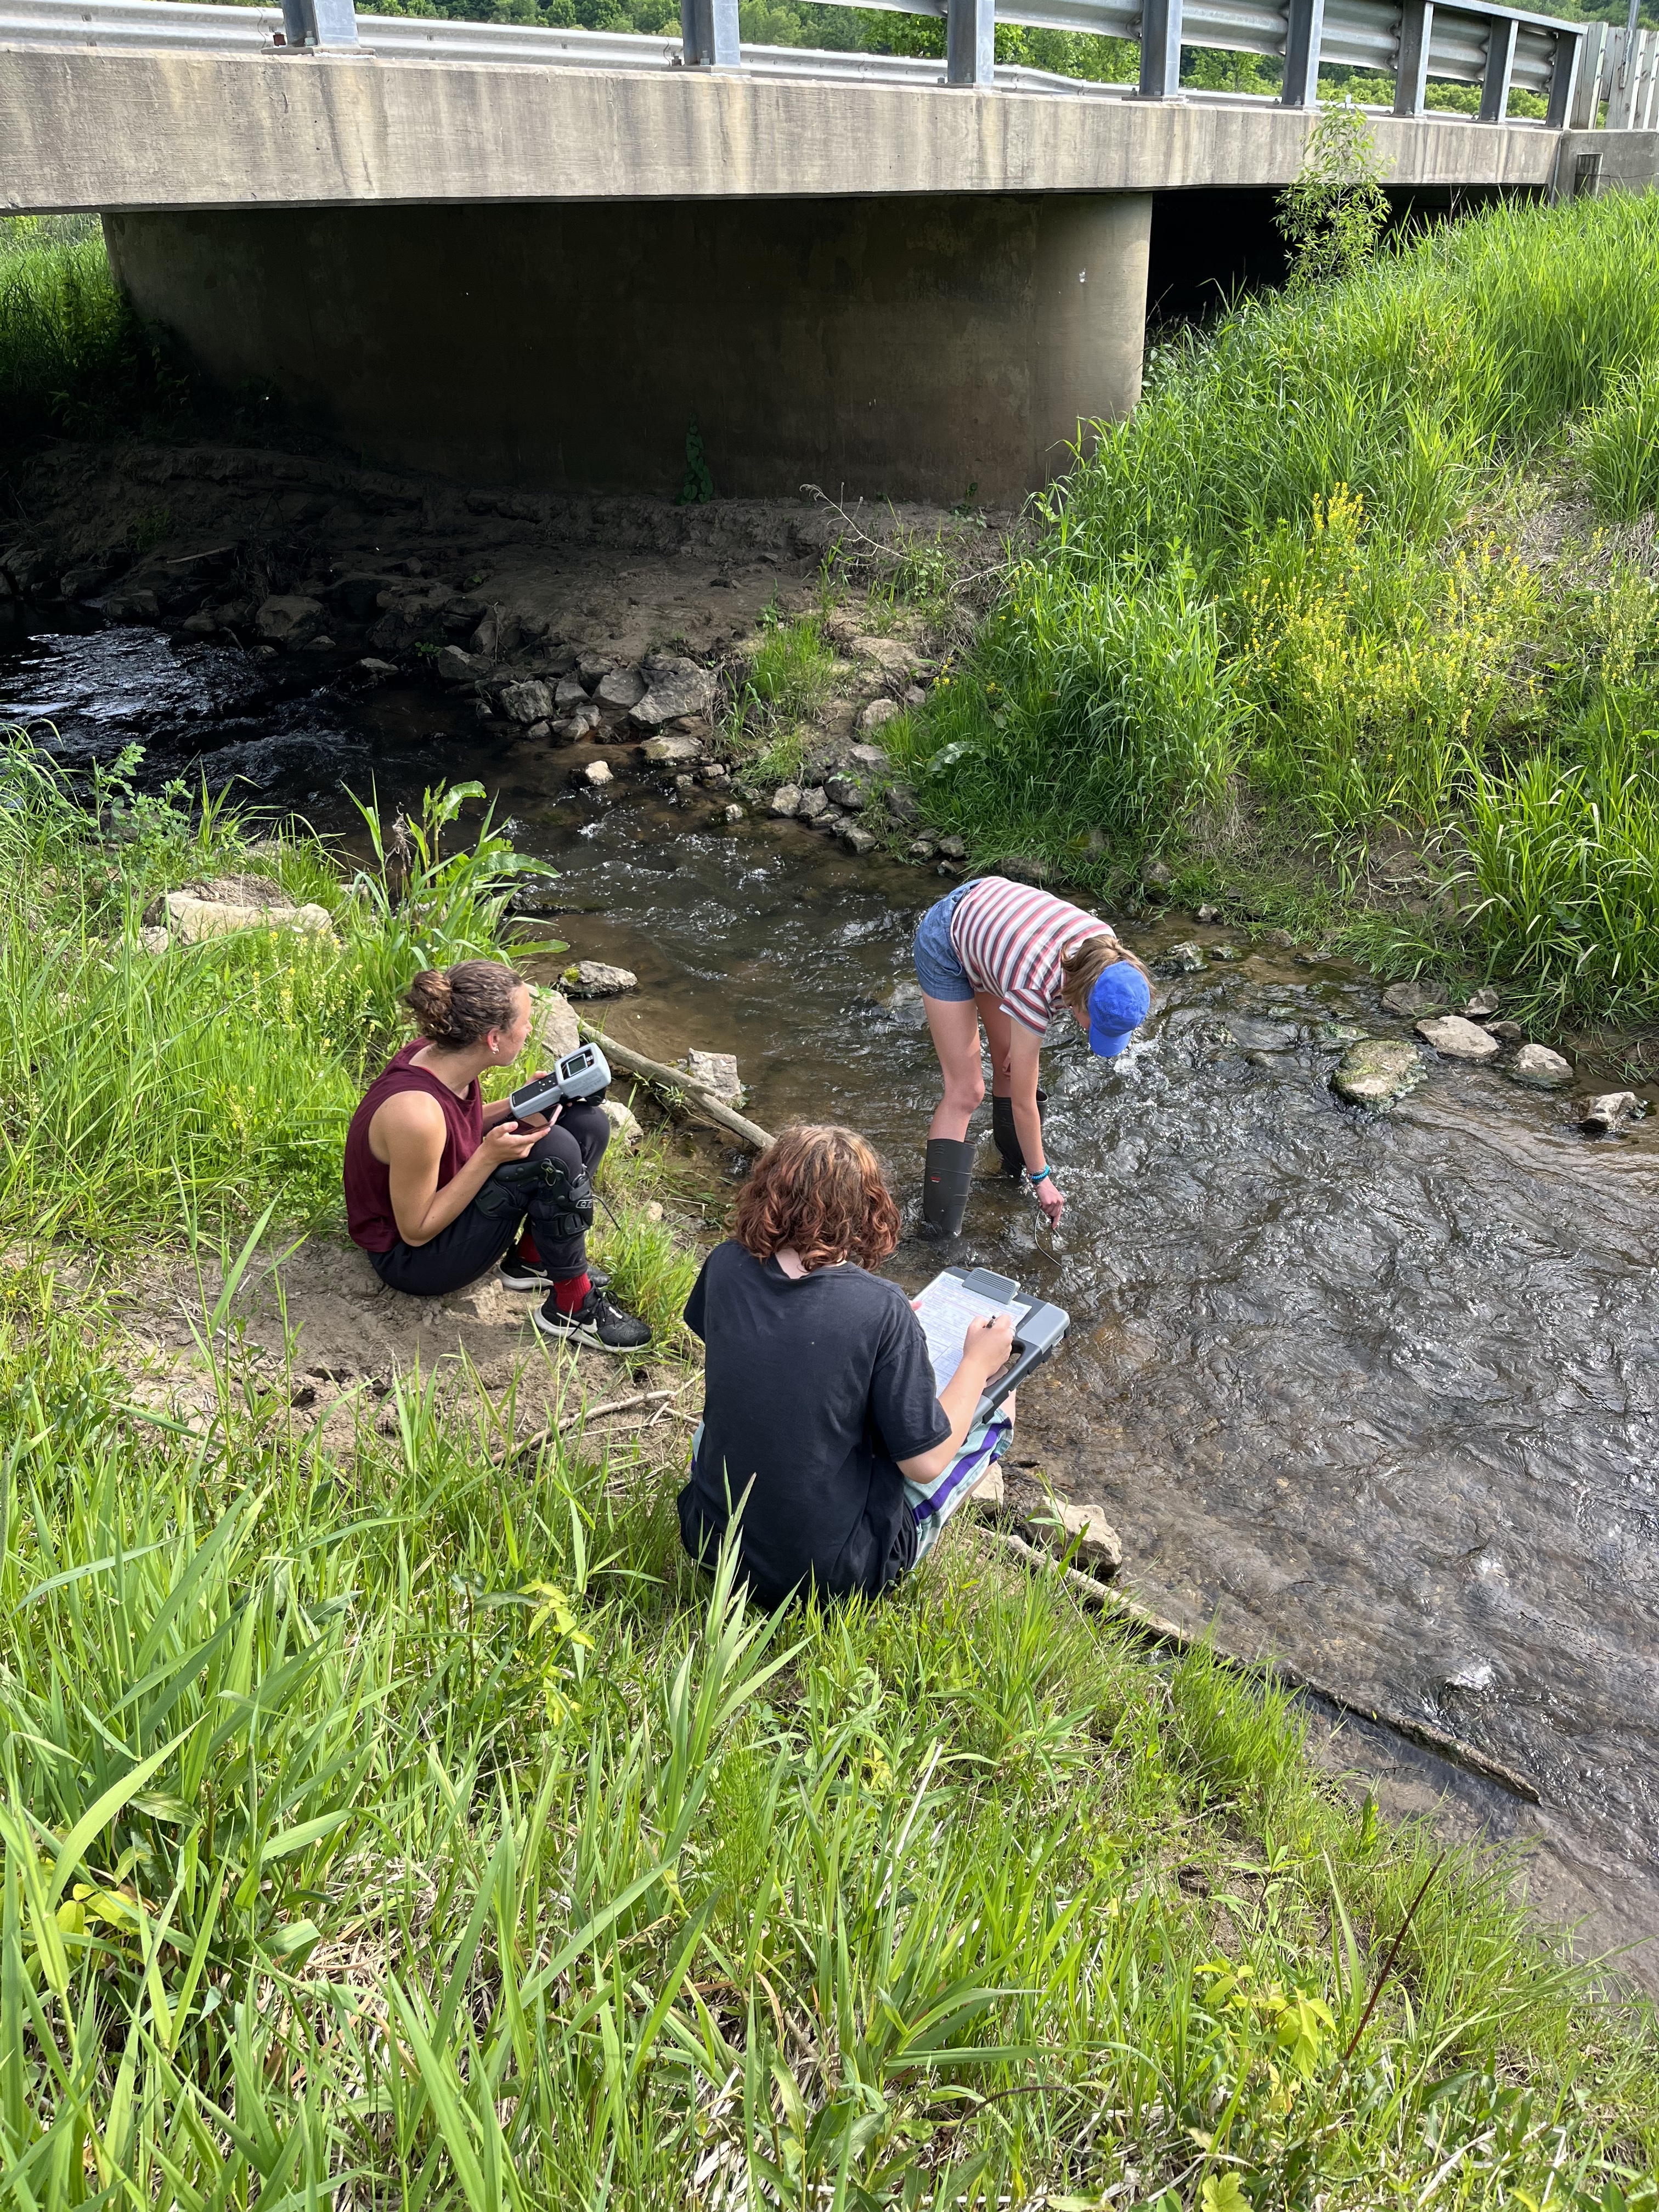 Bear Creek, Reads and Tainter Creeks Watershed (LW03)